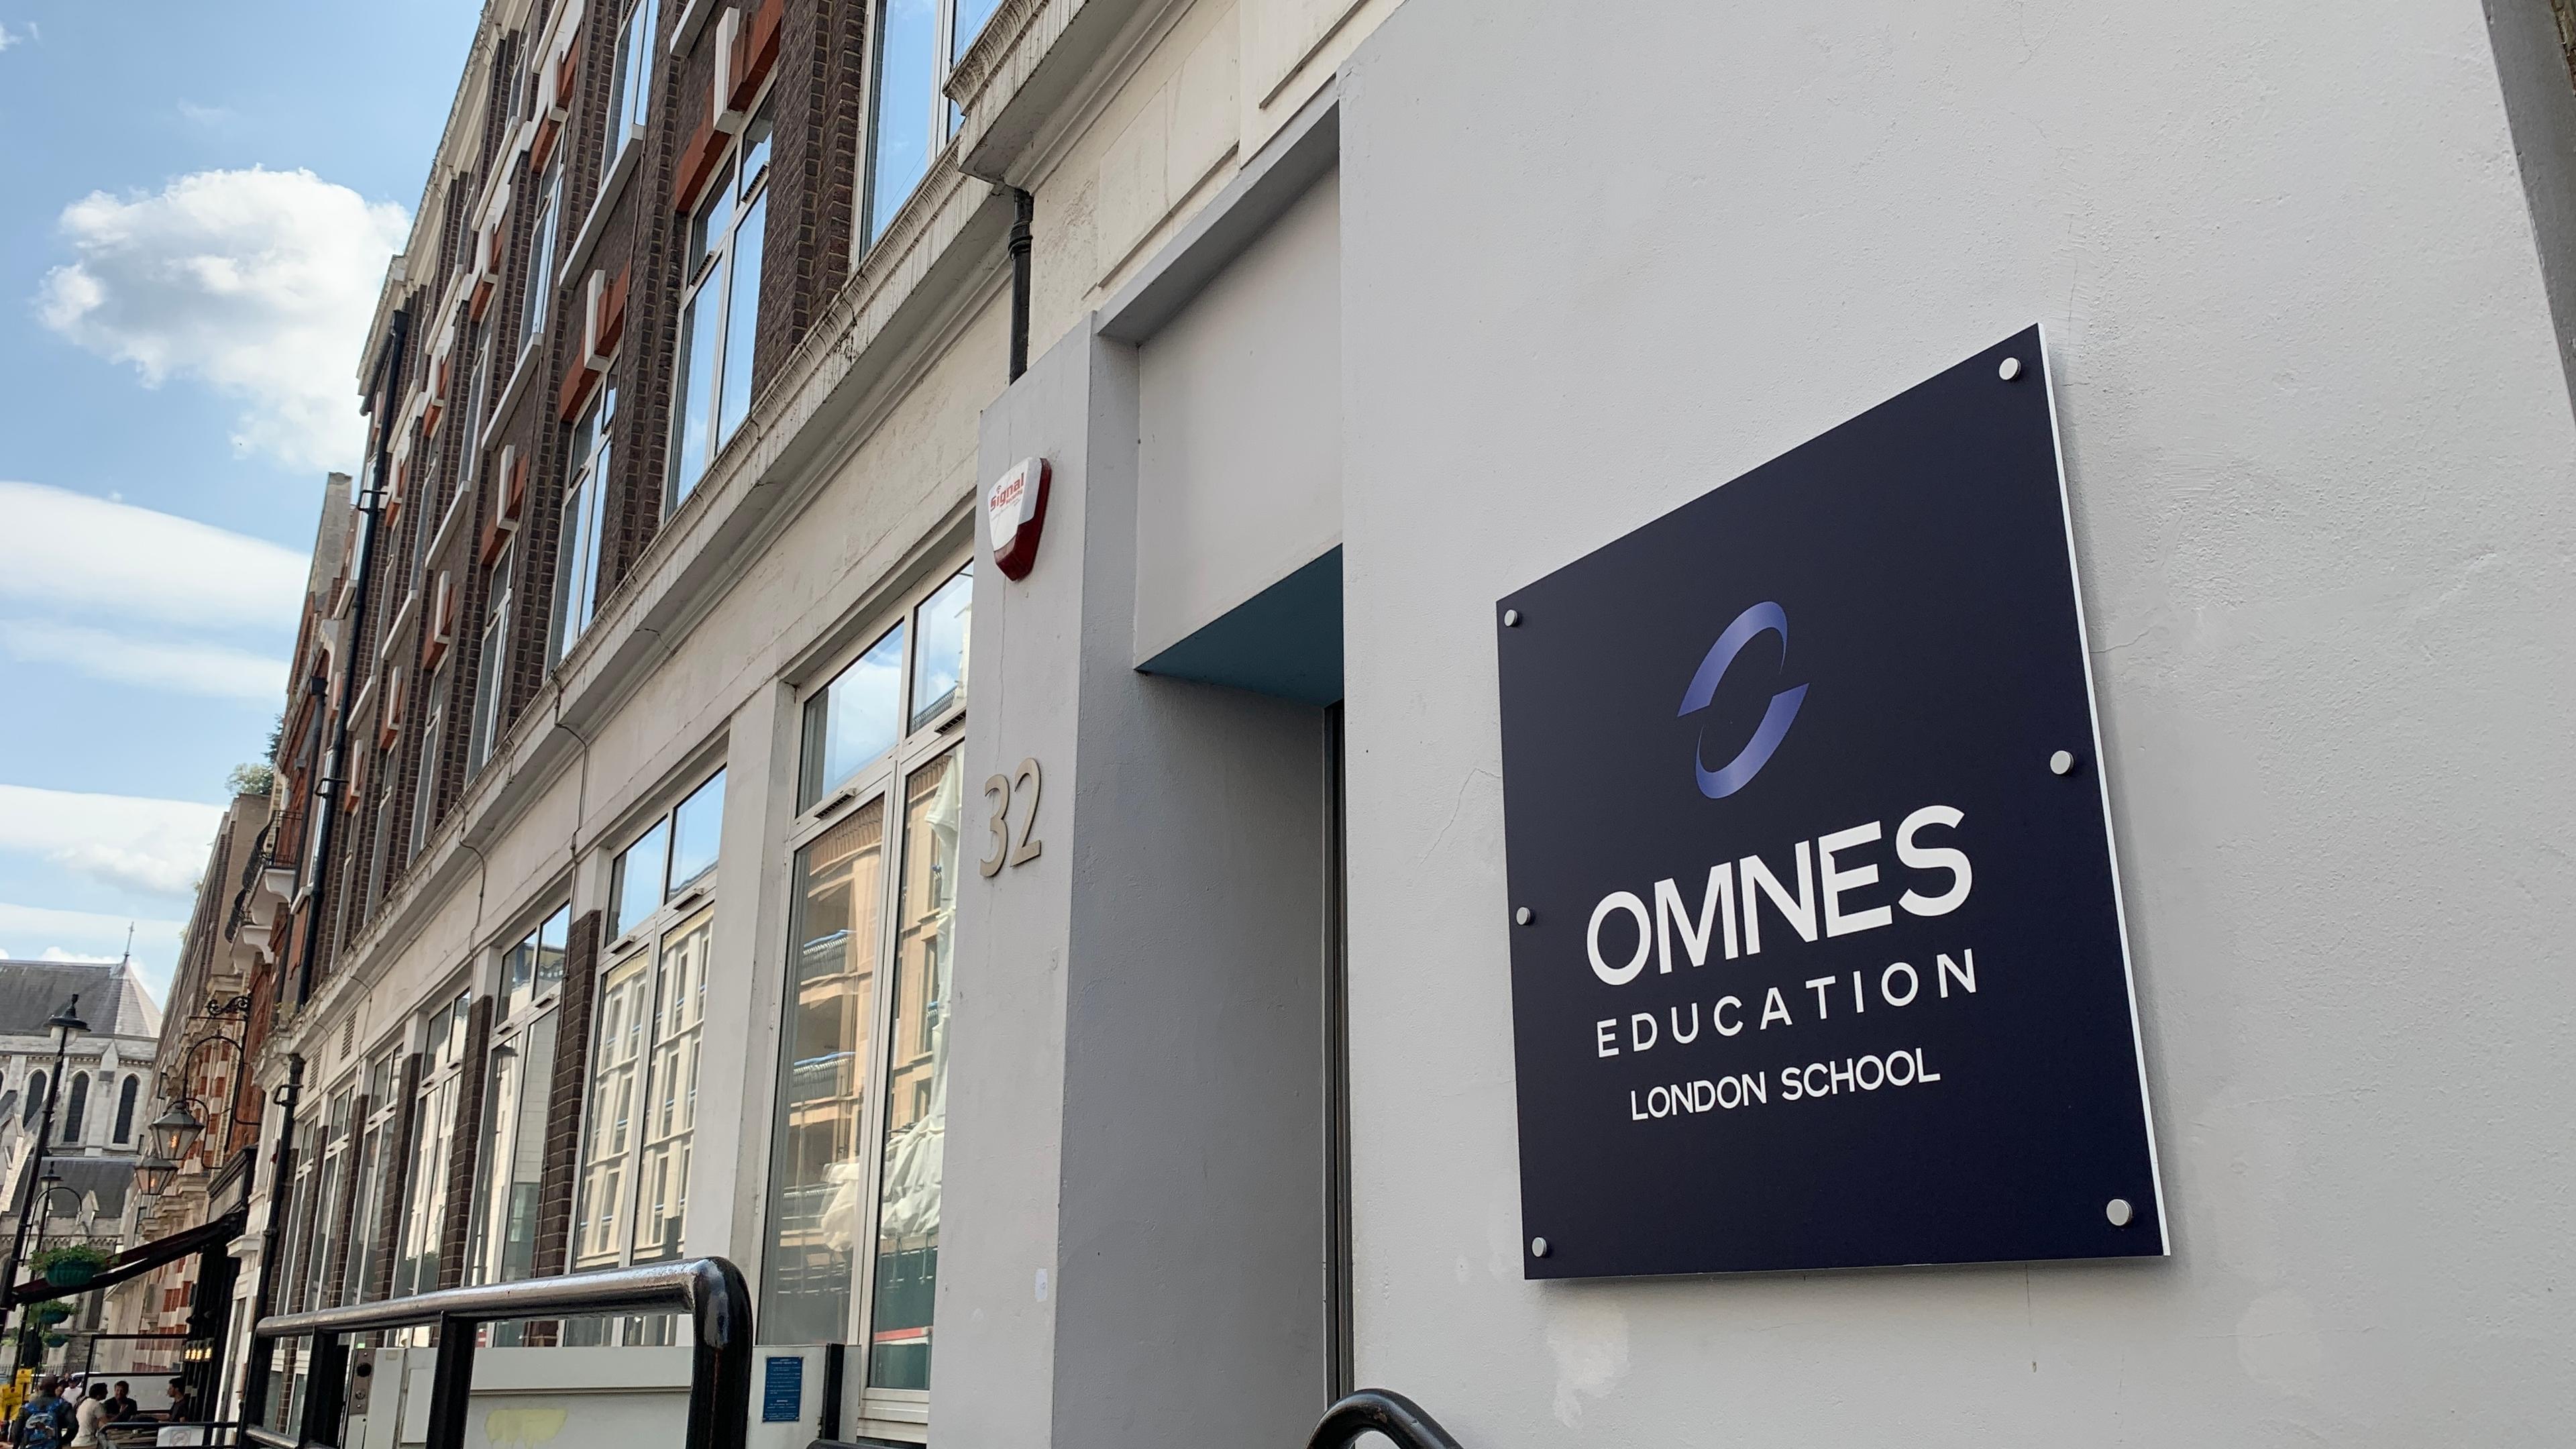 Classroom Up To 30, OMNES Education London School photo #5